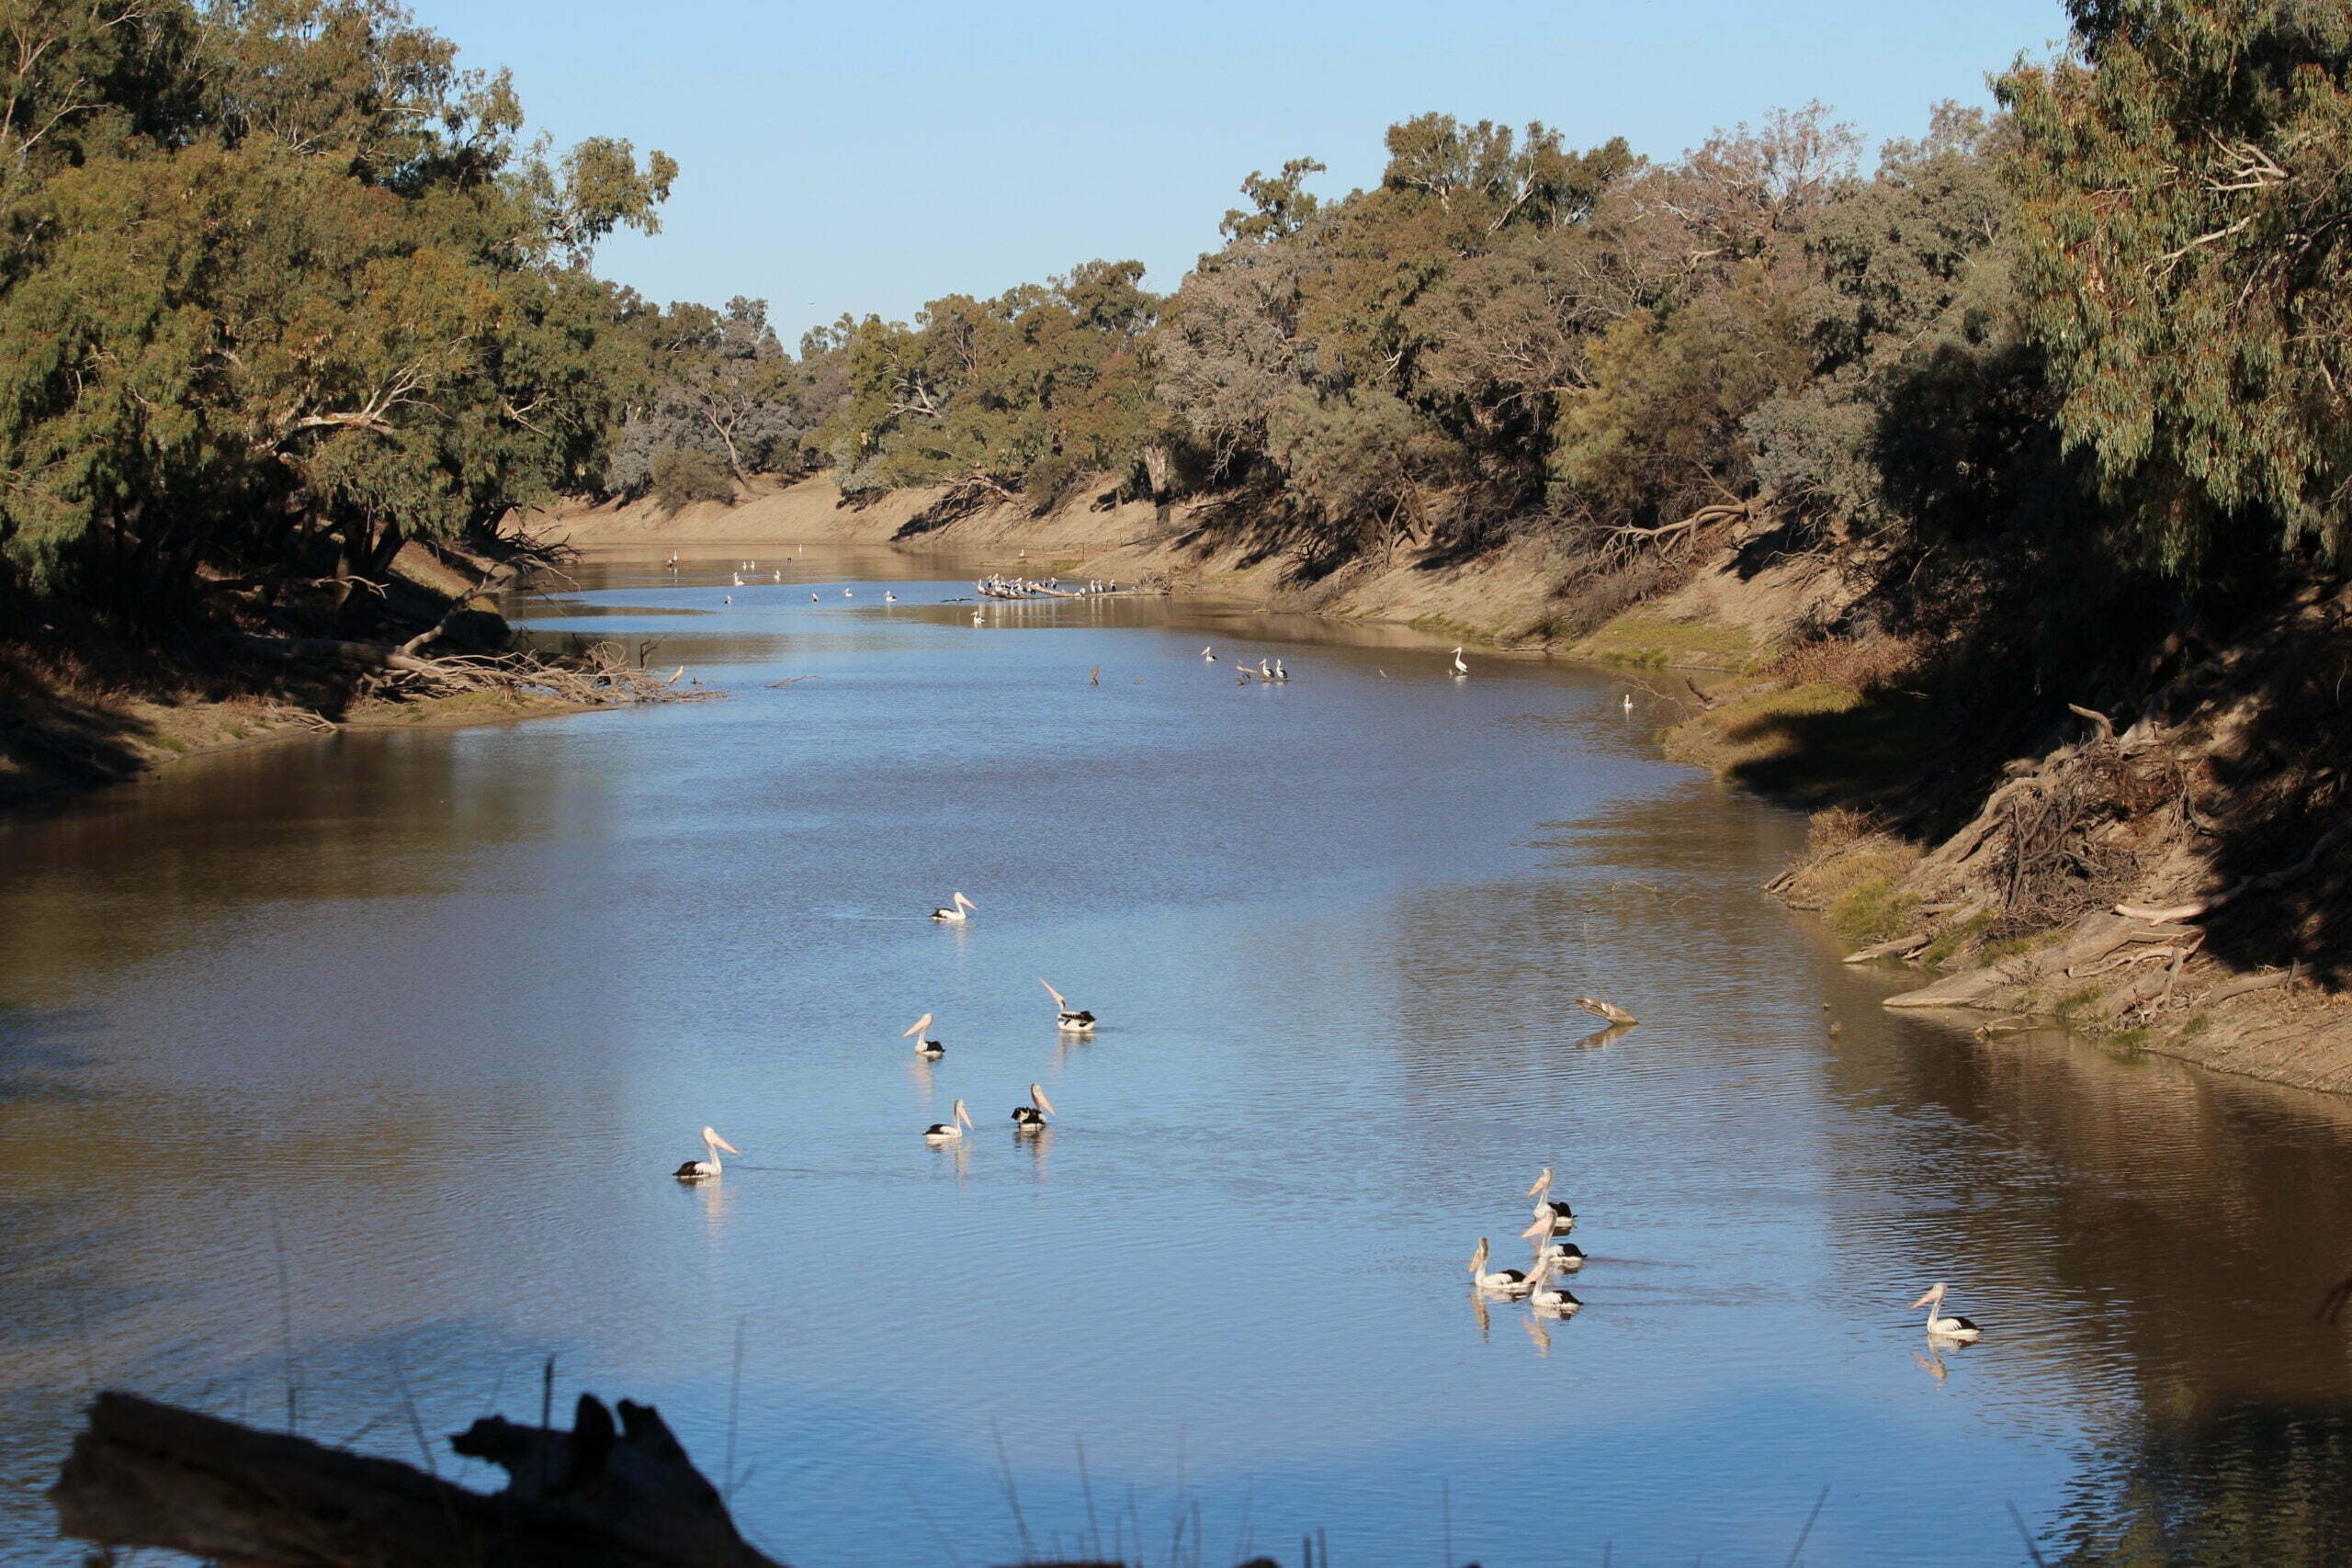 The Darling River is populated by pelicans on a bright sunny day.